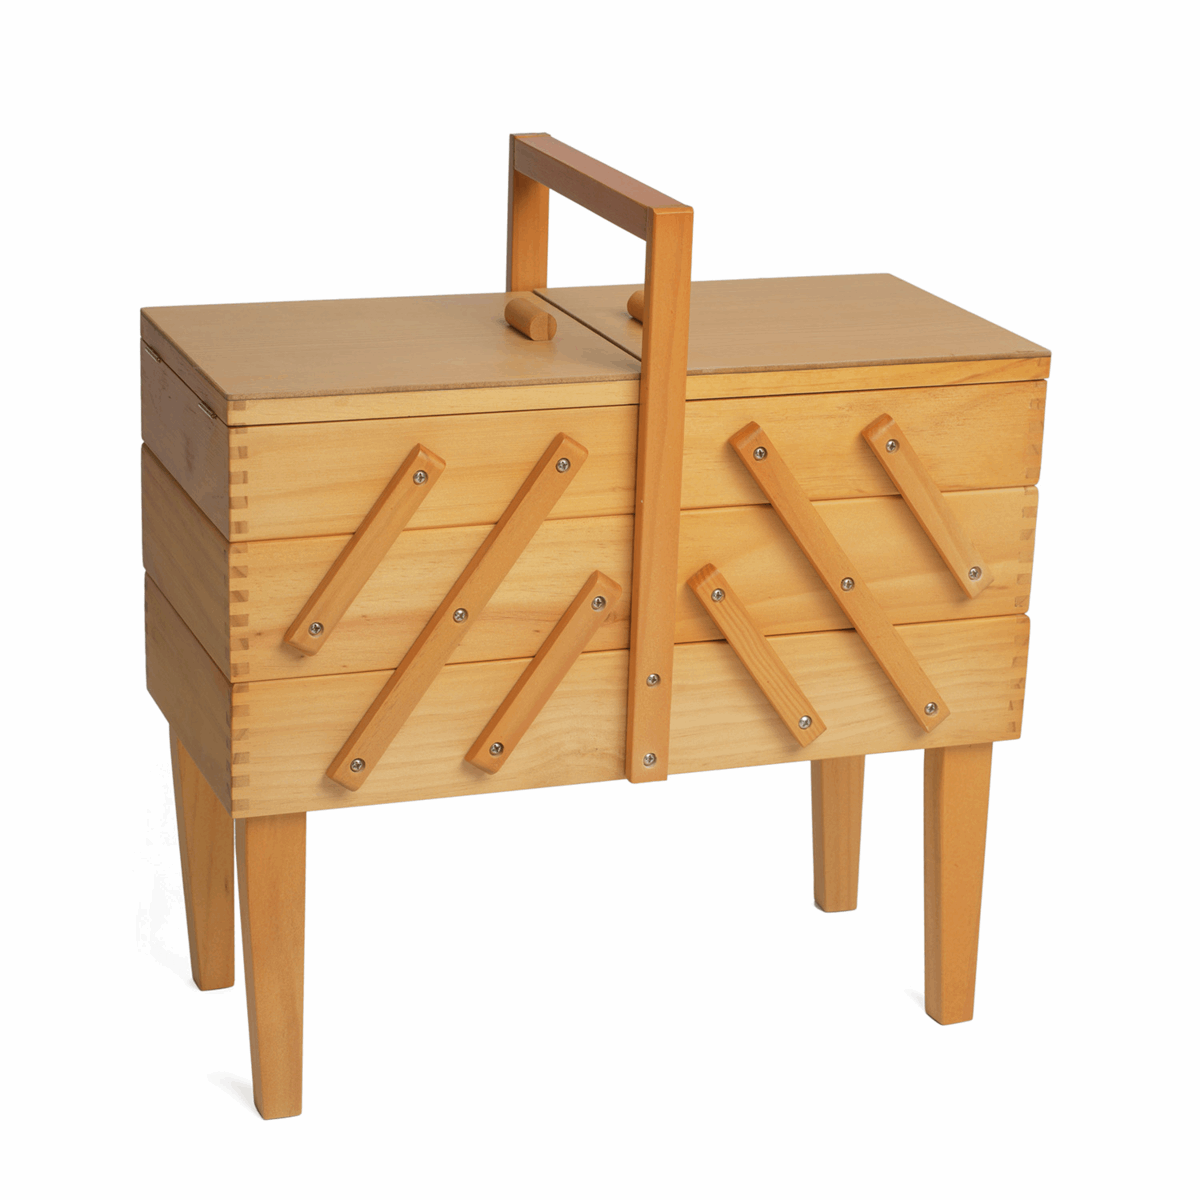 Sewing Box Cantilever Wood 3 Tier with Legs